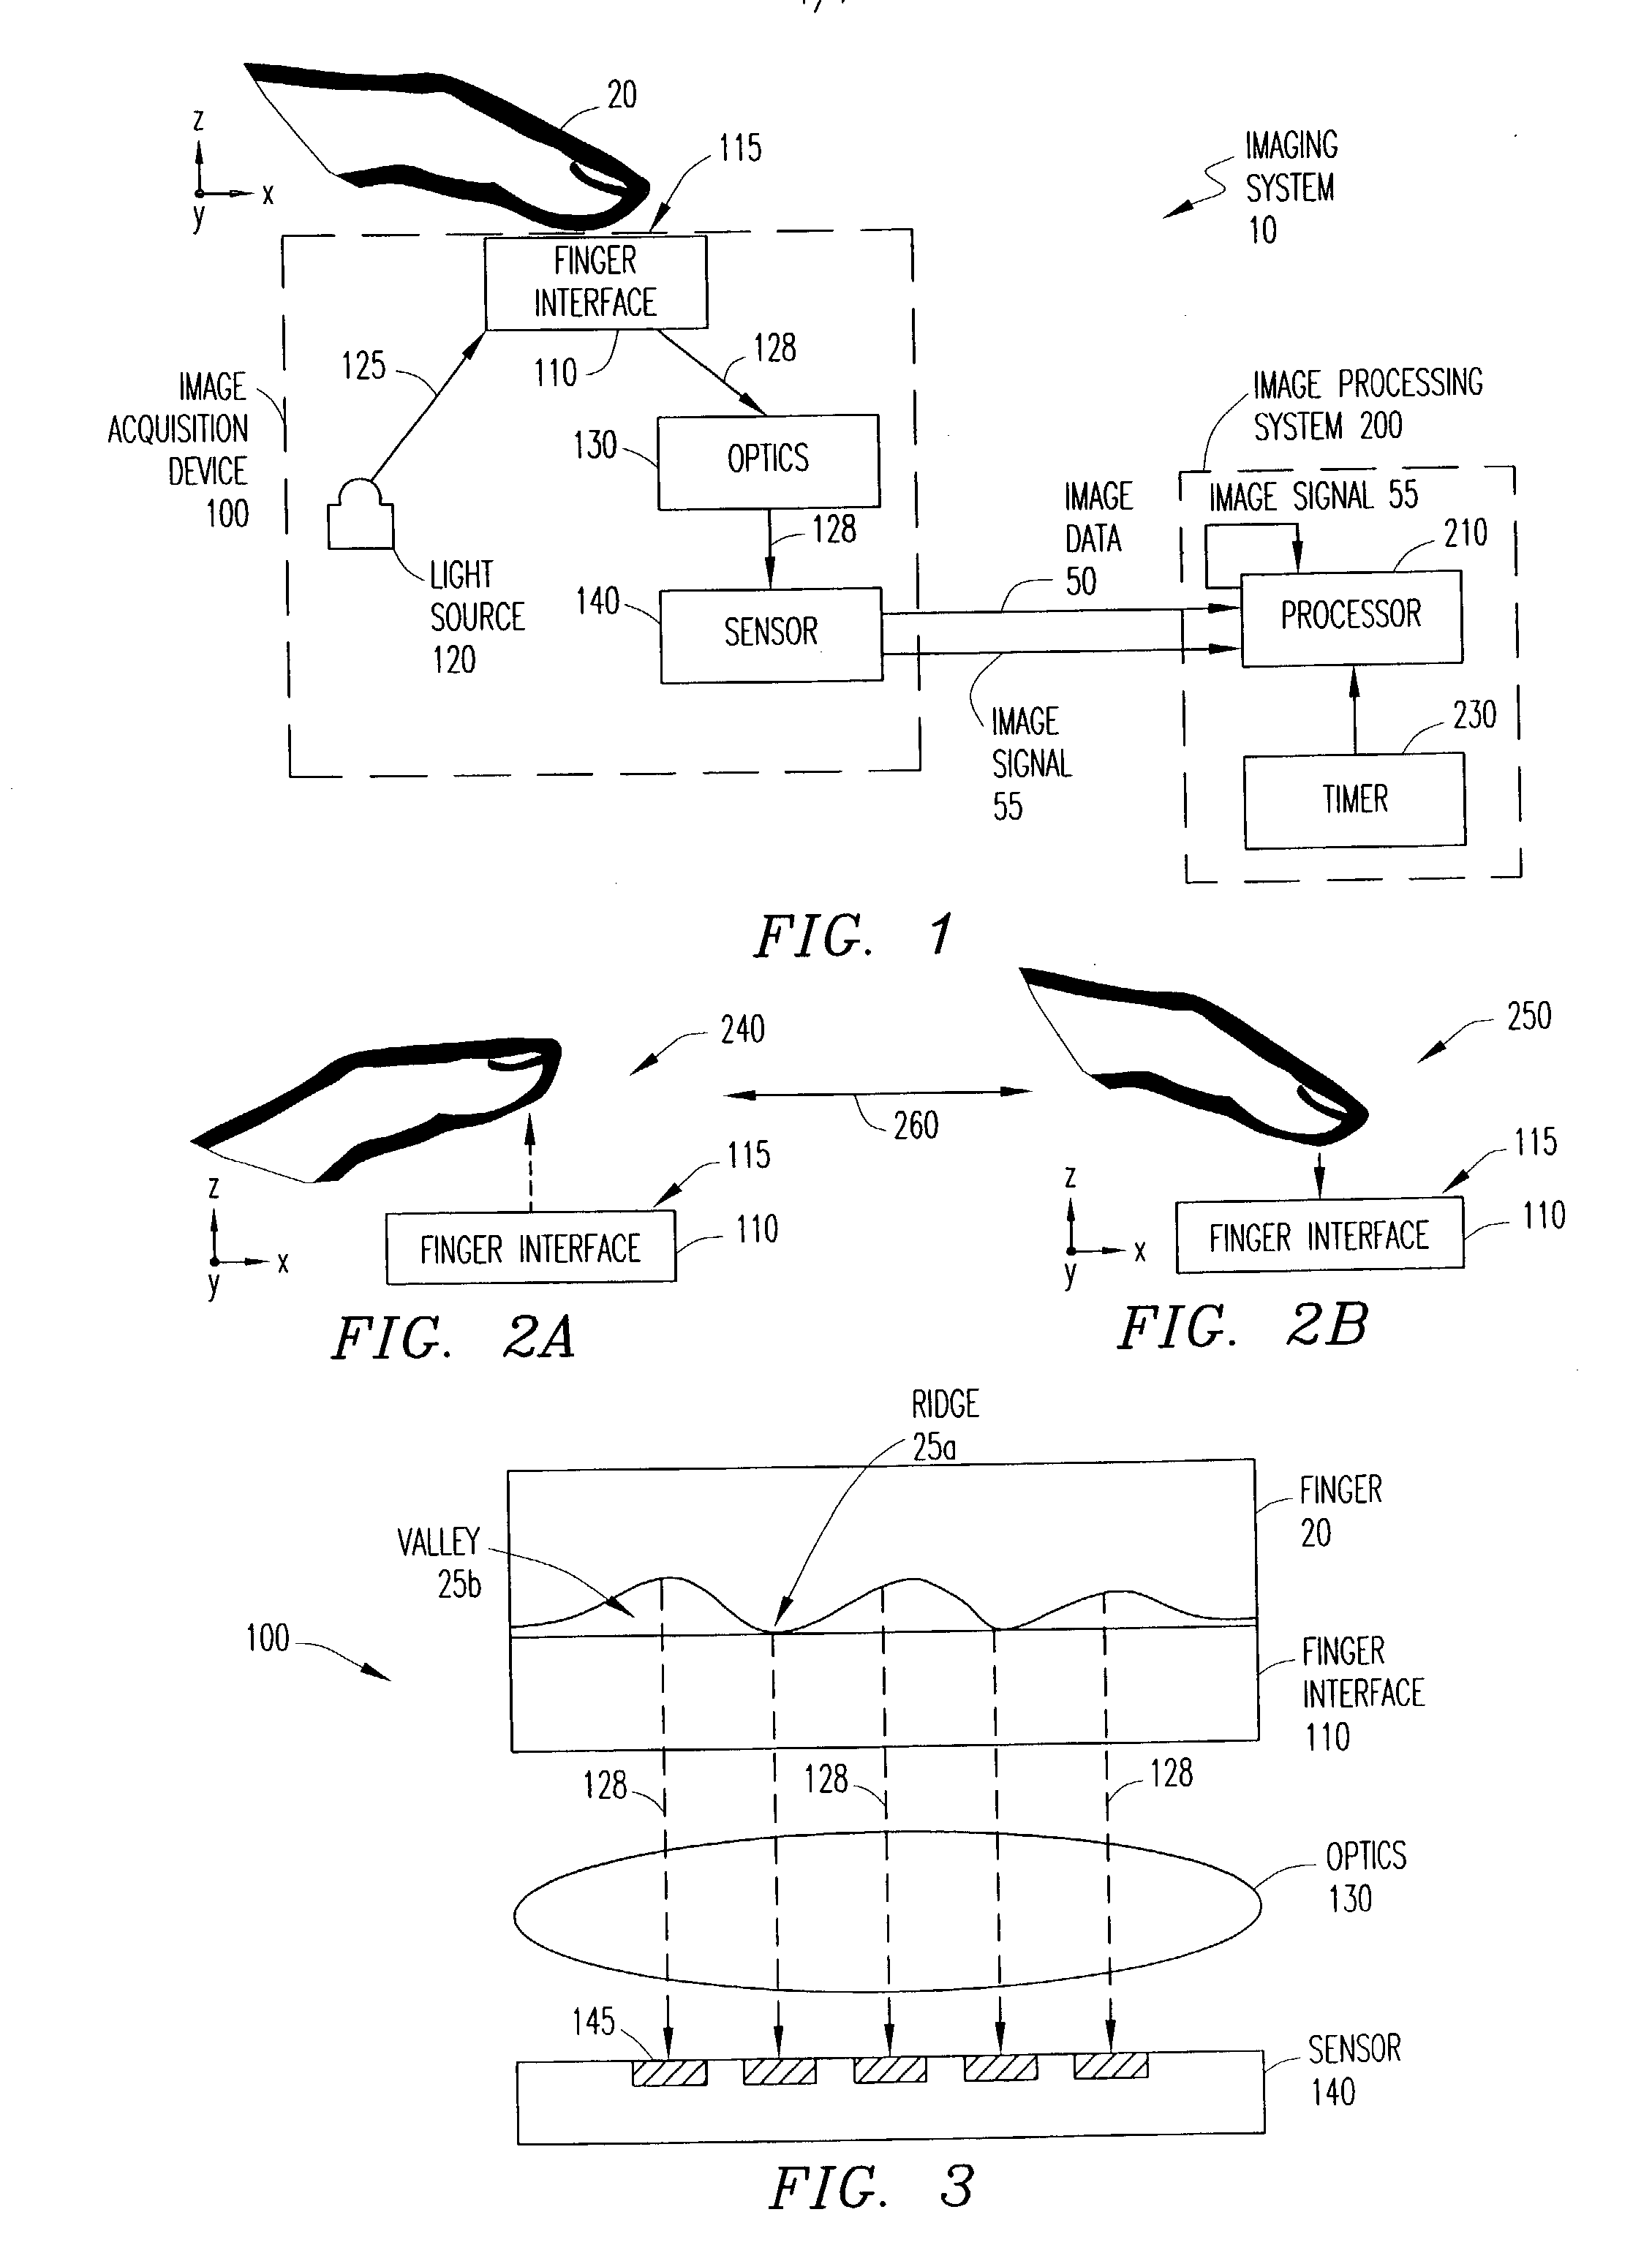 System and method for optically detecting a click event